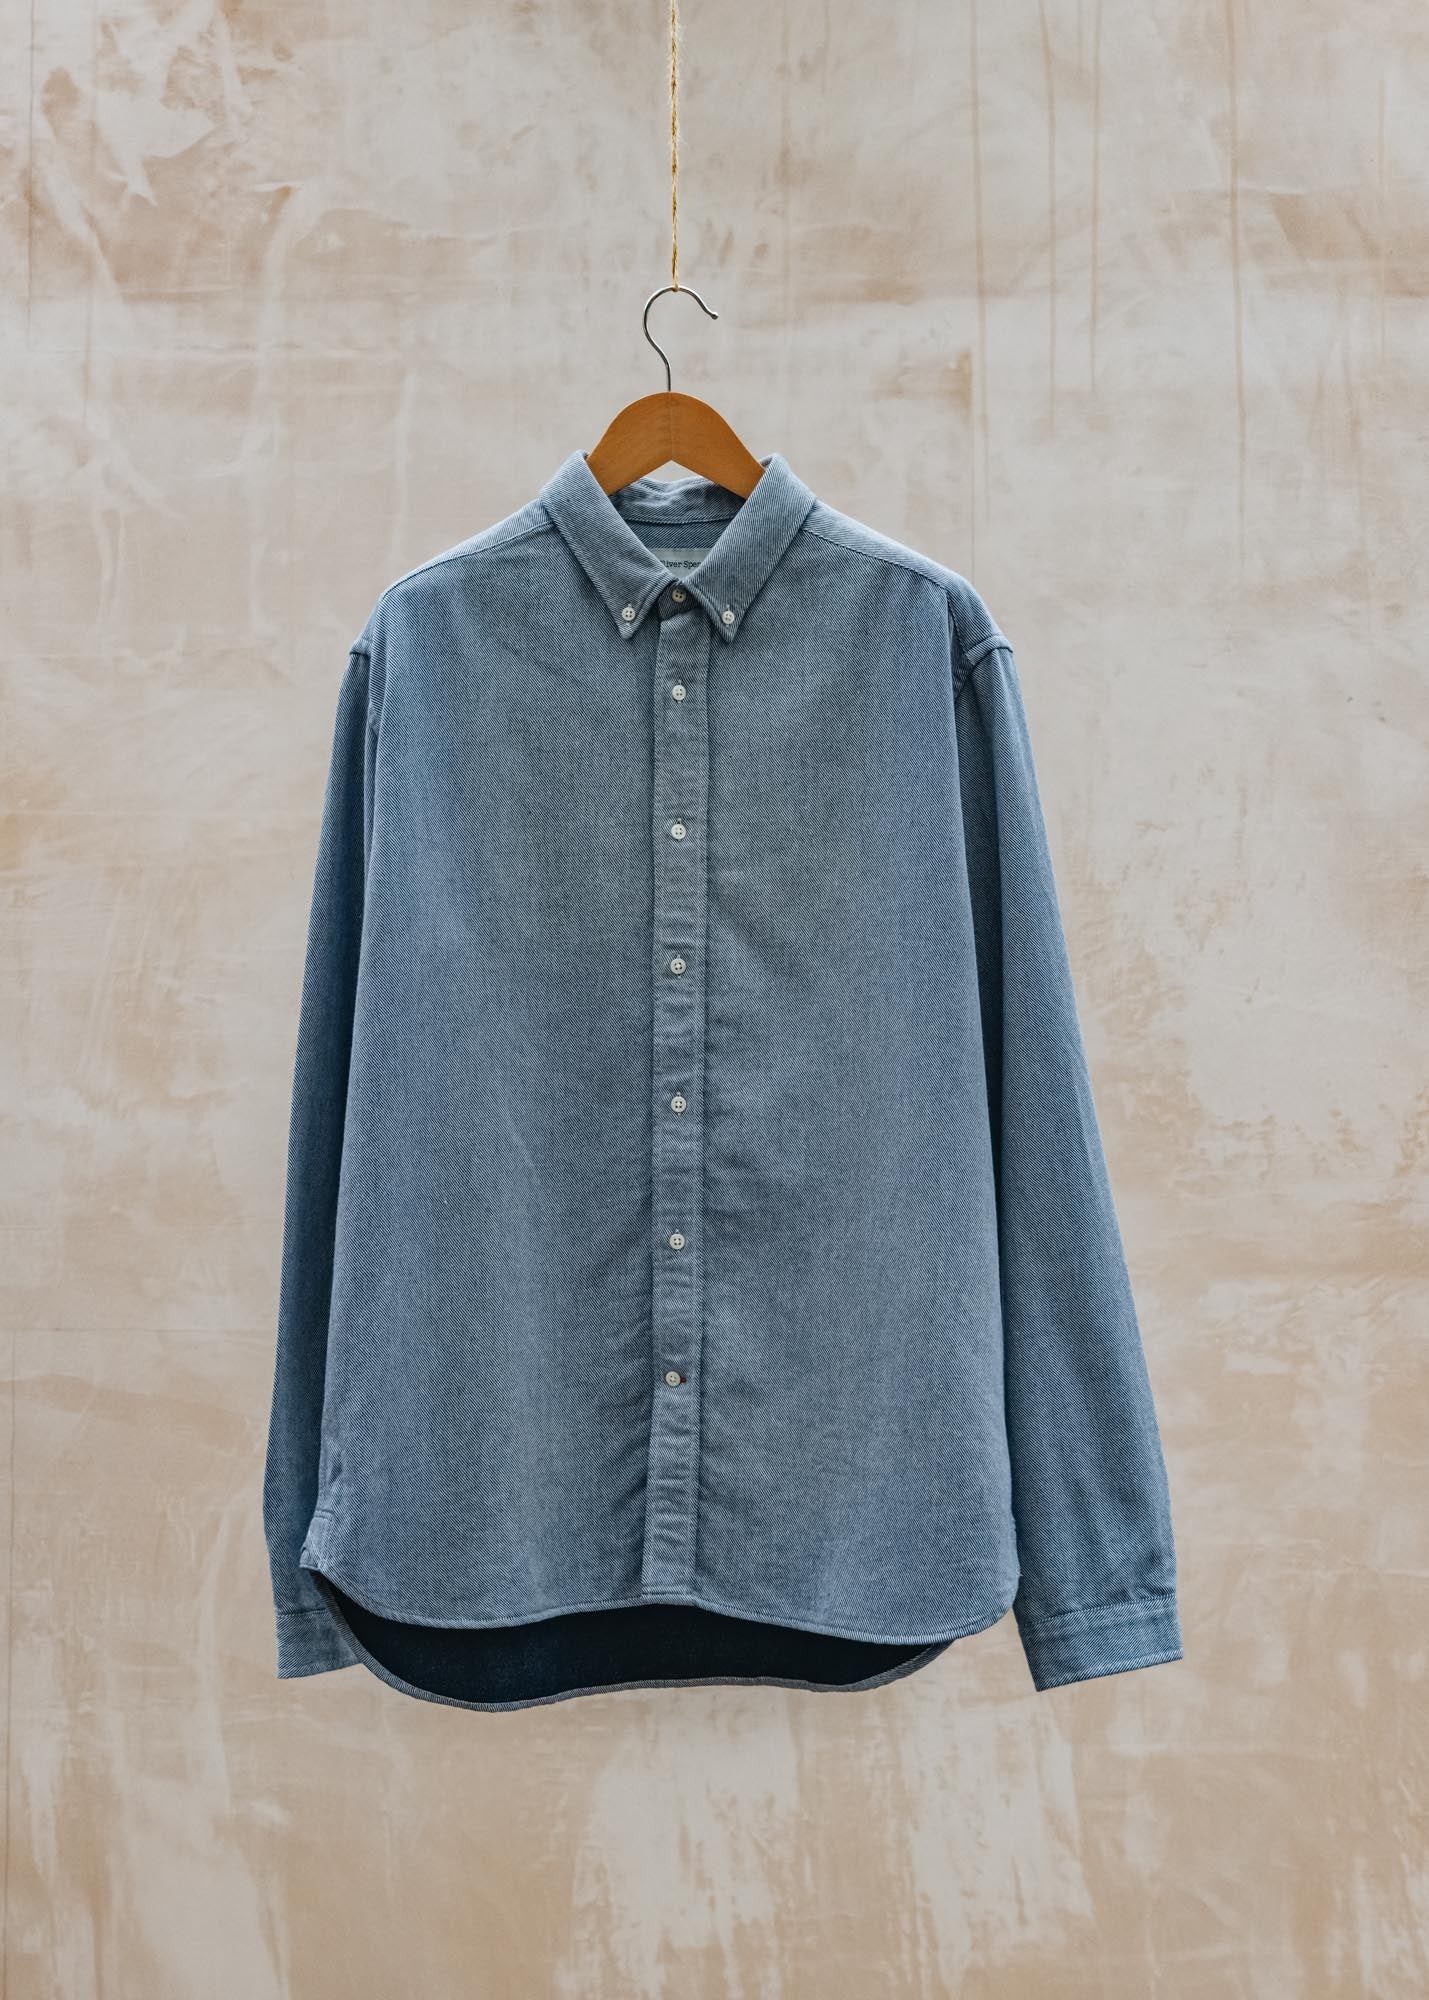 Oliver Spencer Brook Shirt in Mitchell Blue